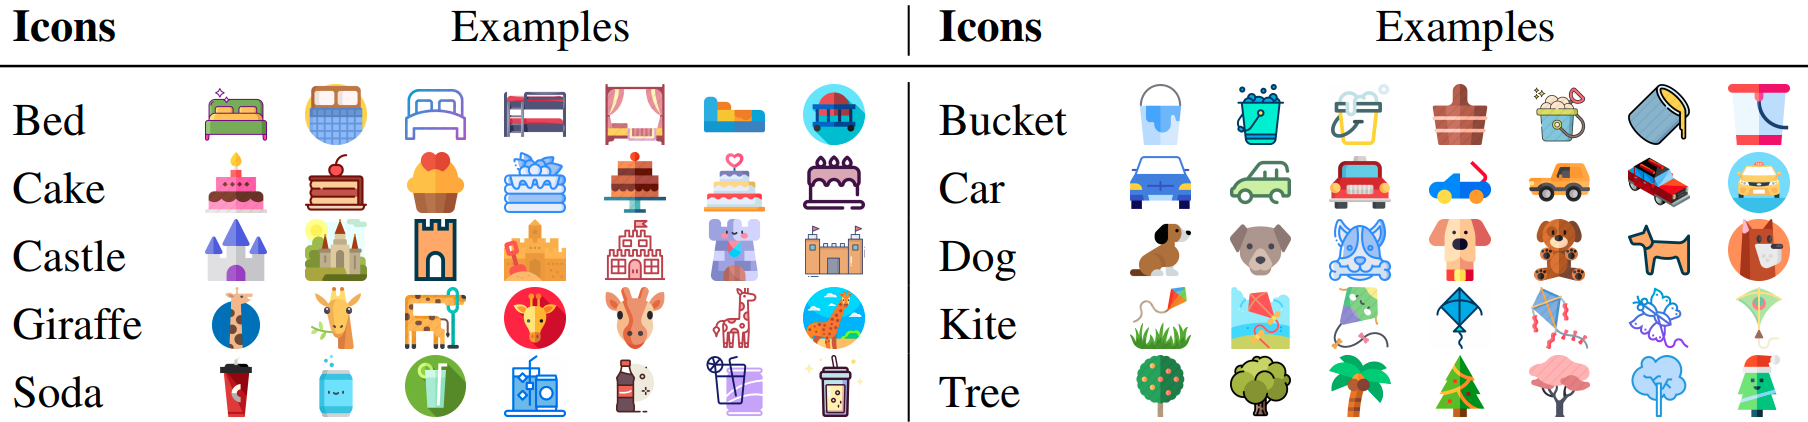 iconqa_examples.png